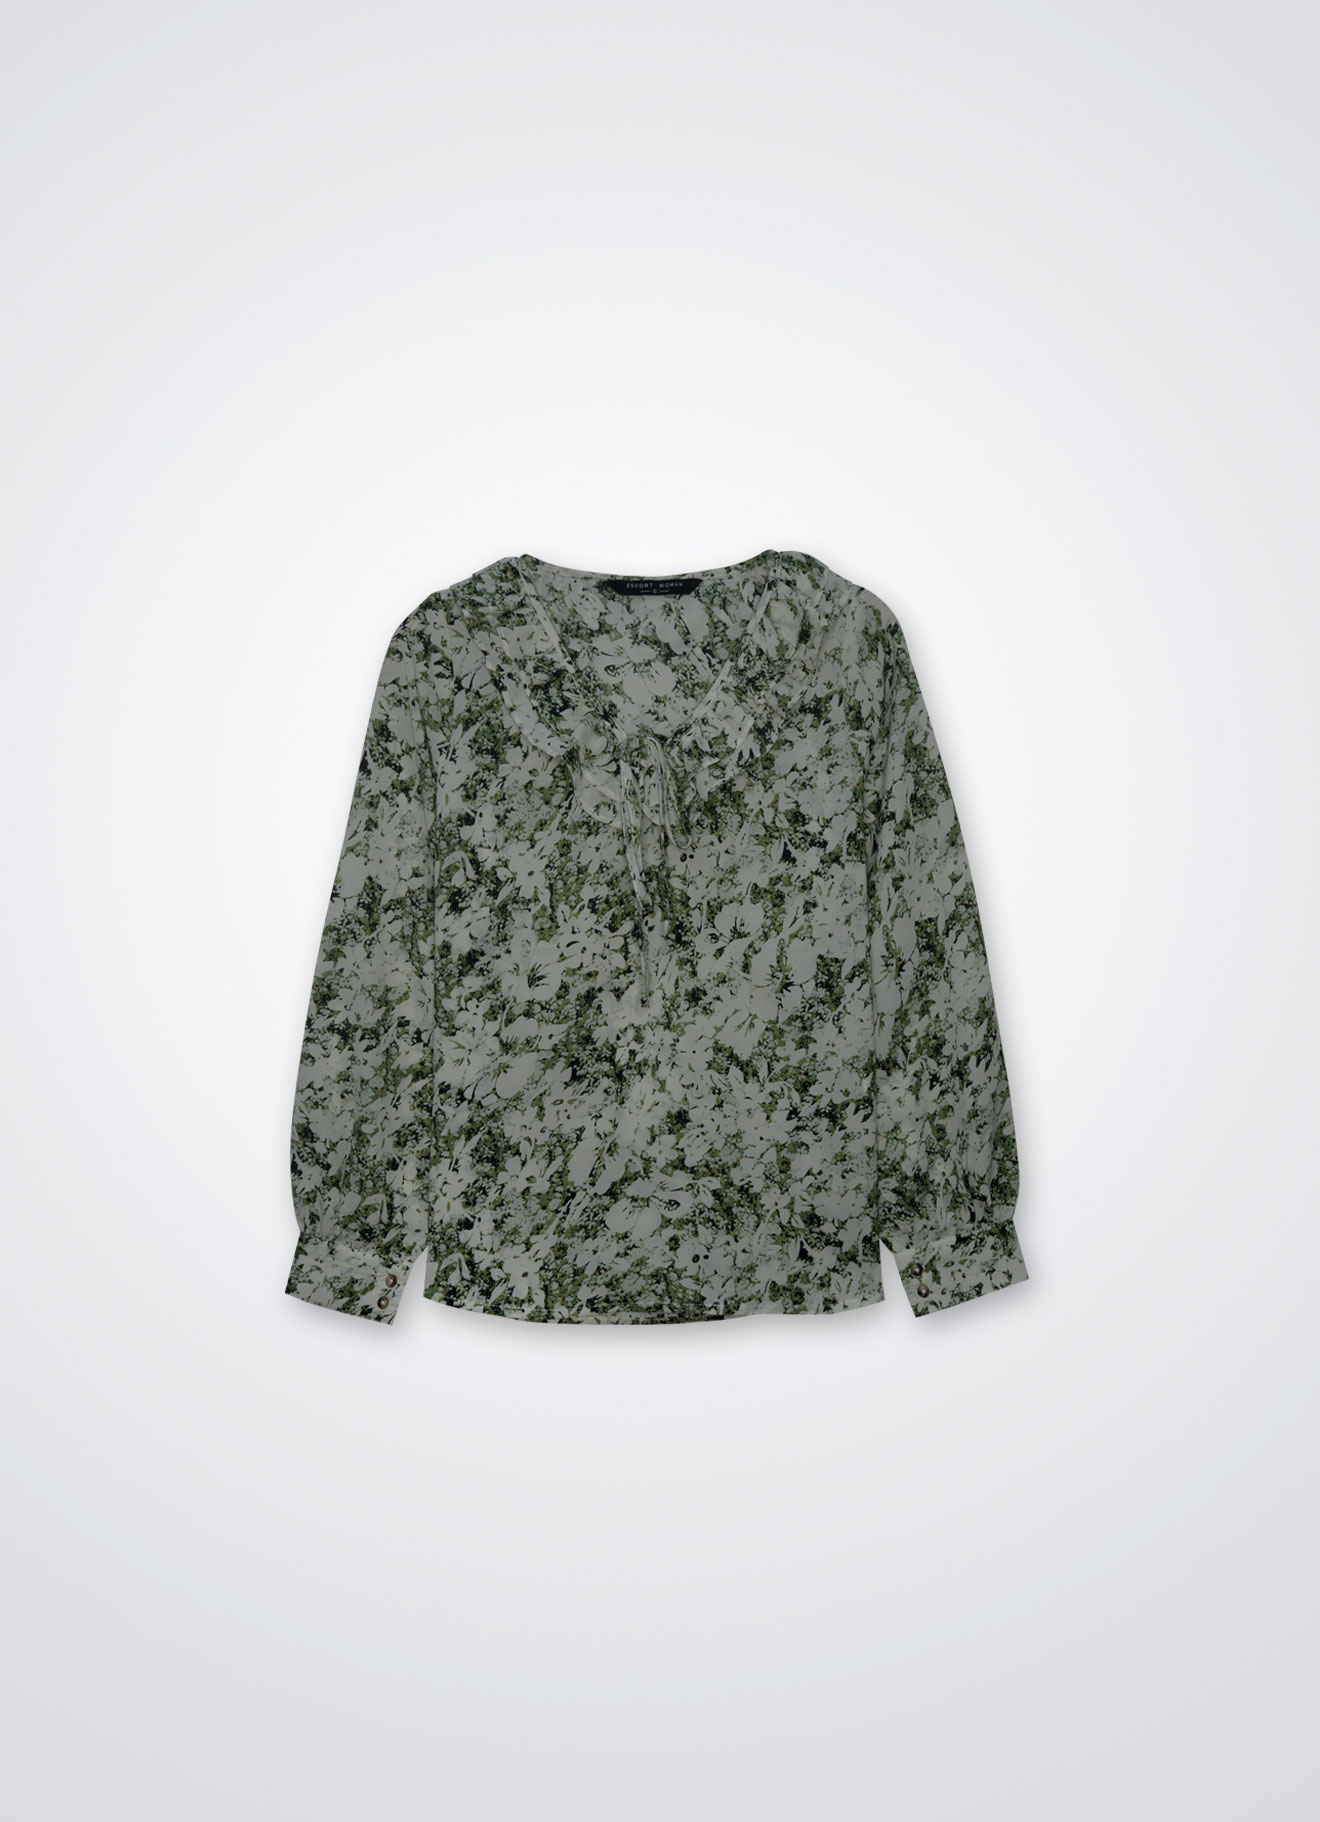 Aspen-Green by Pleated Blouse